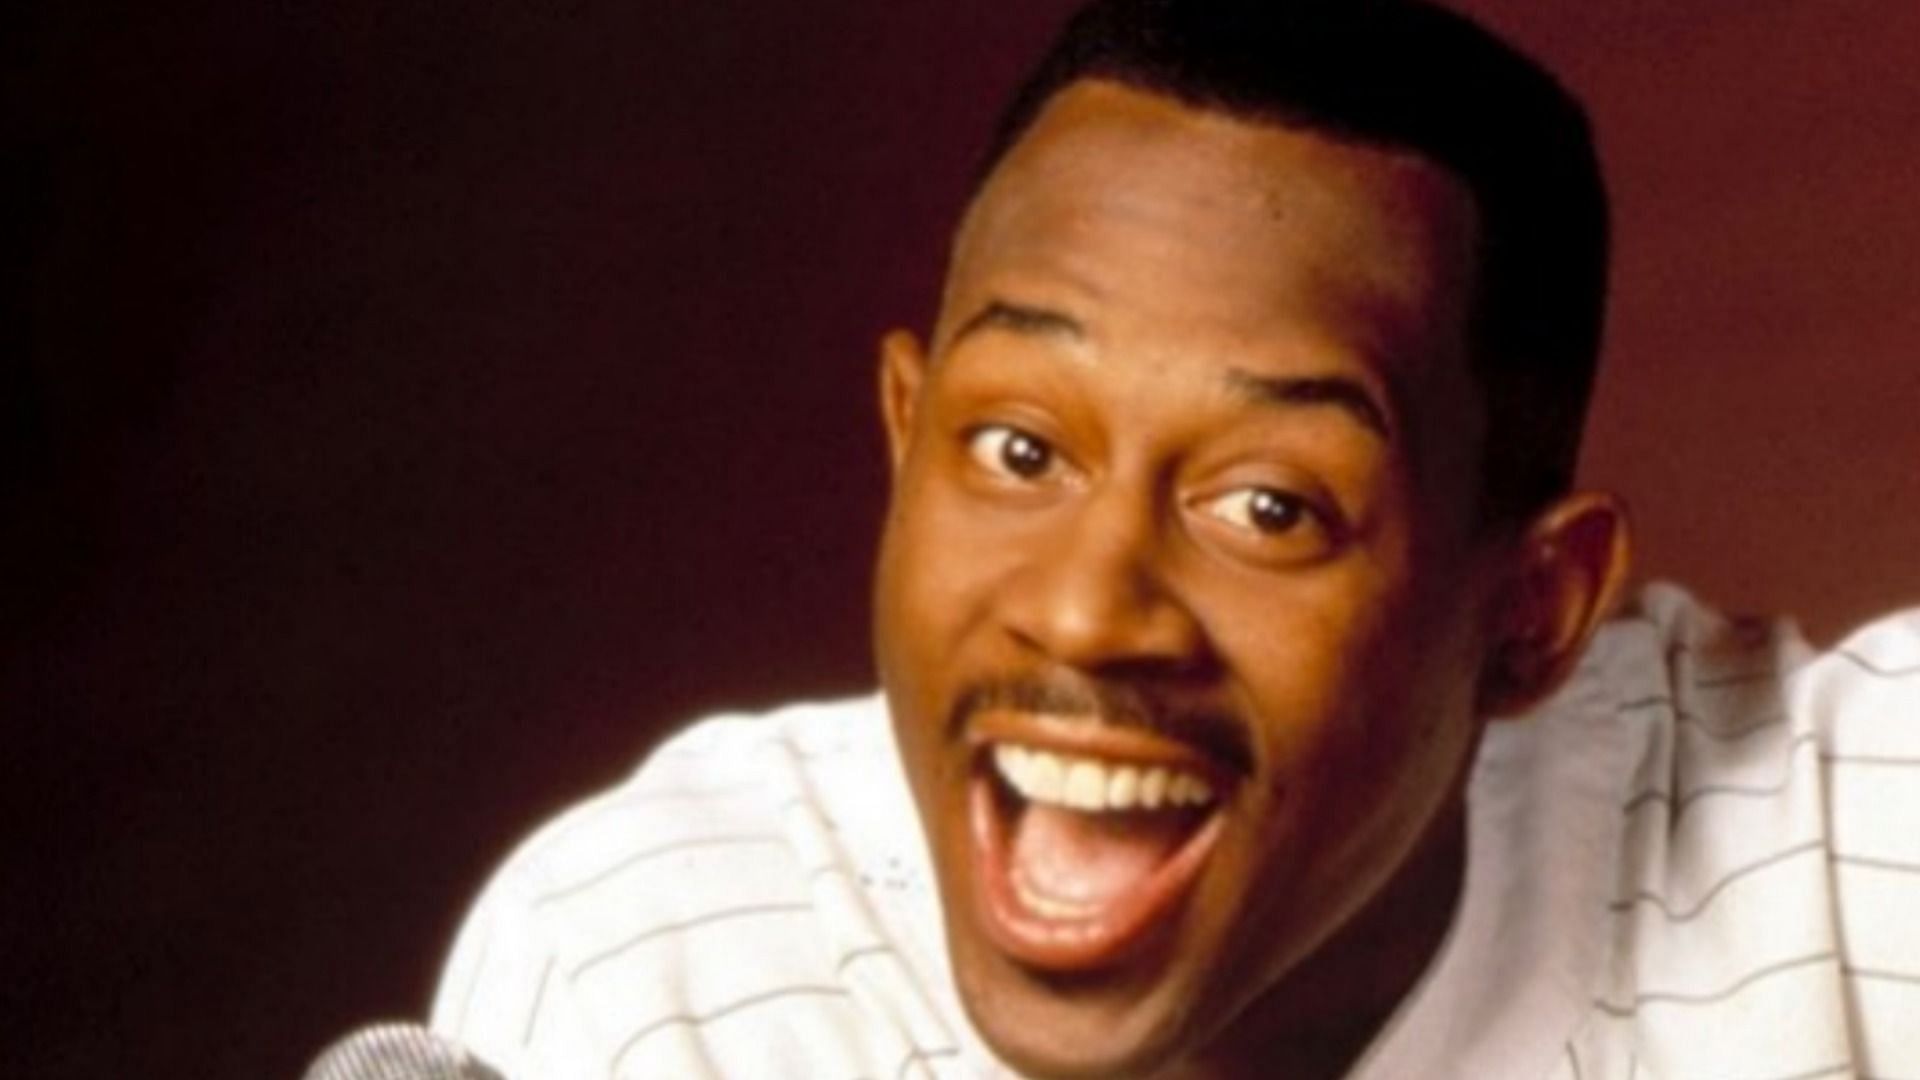 Martin Lawrence&#039;s comedic act goes viral amid Will Smith&#039;s Oscar&#039;s slap fiasco (Image via martinlawrence/Instagram)